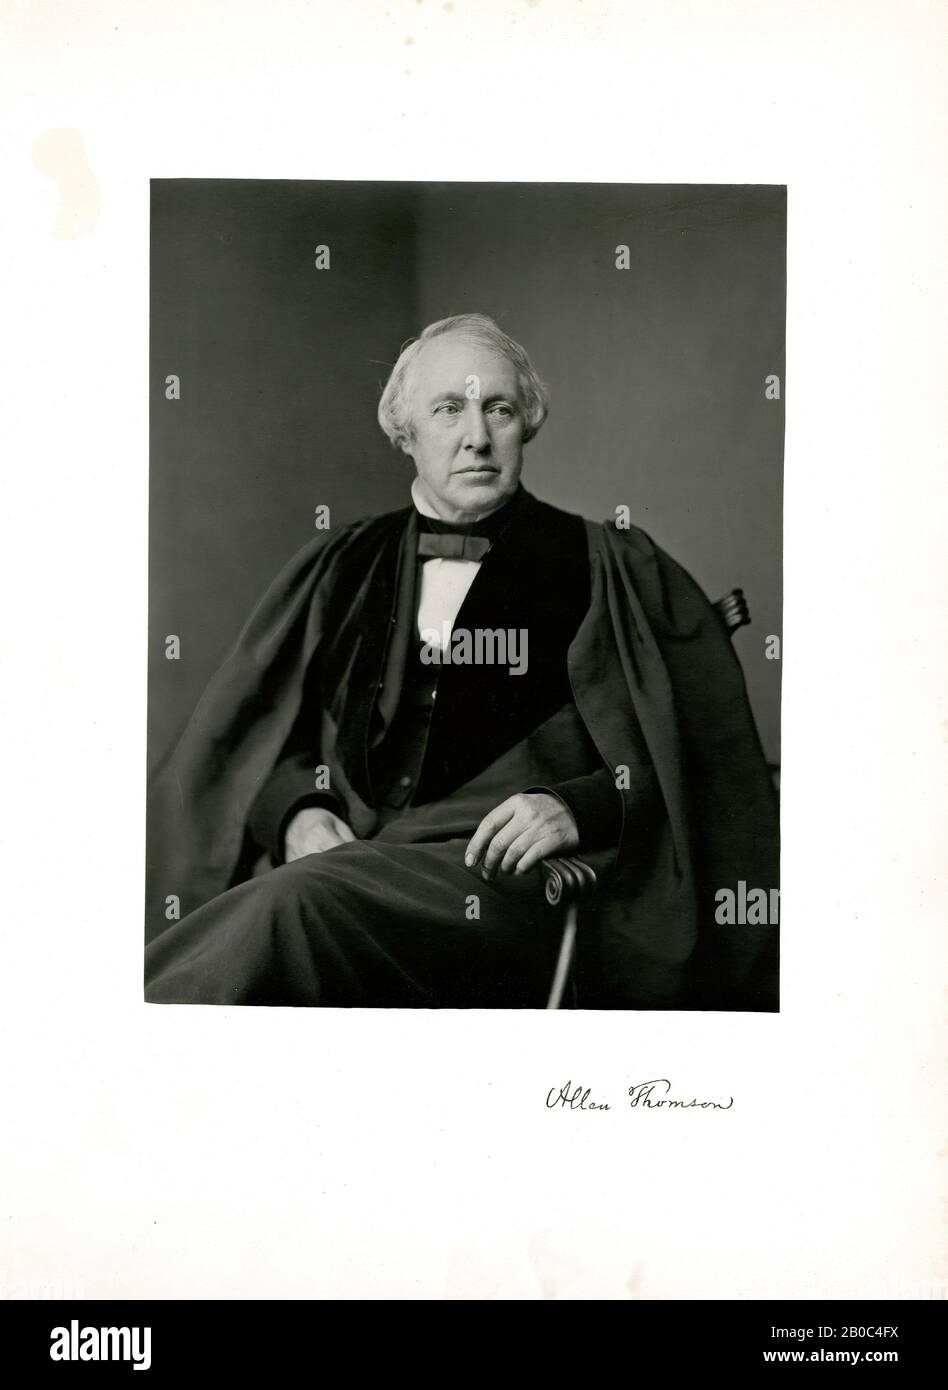 Thomas Annan, Portrait of Allen Thomson from Memorials of the Old College of Glasgow, 1871, carbonprint Stock Photo